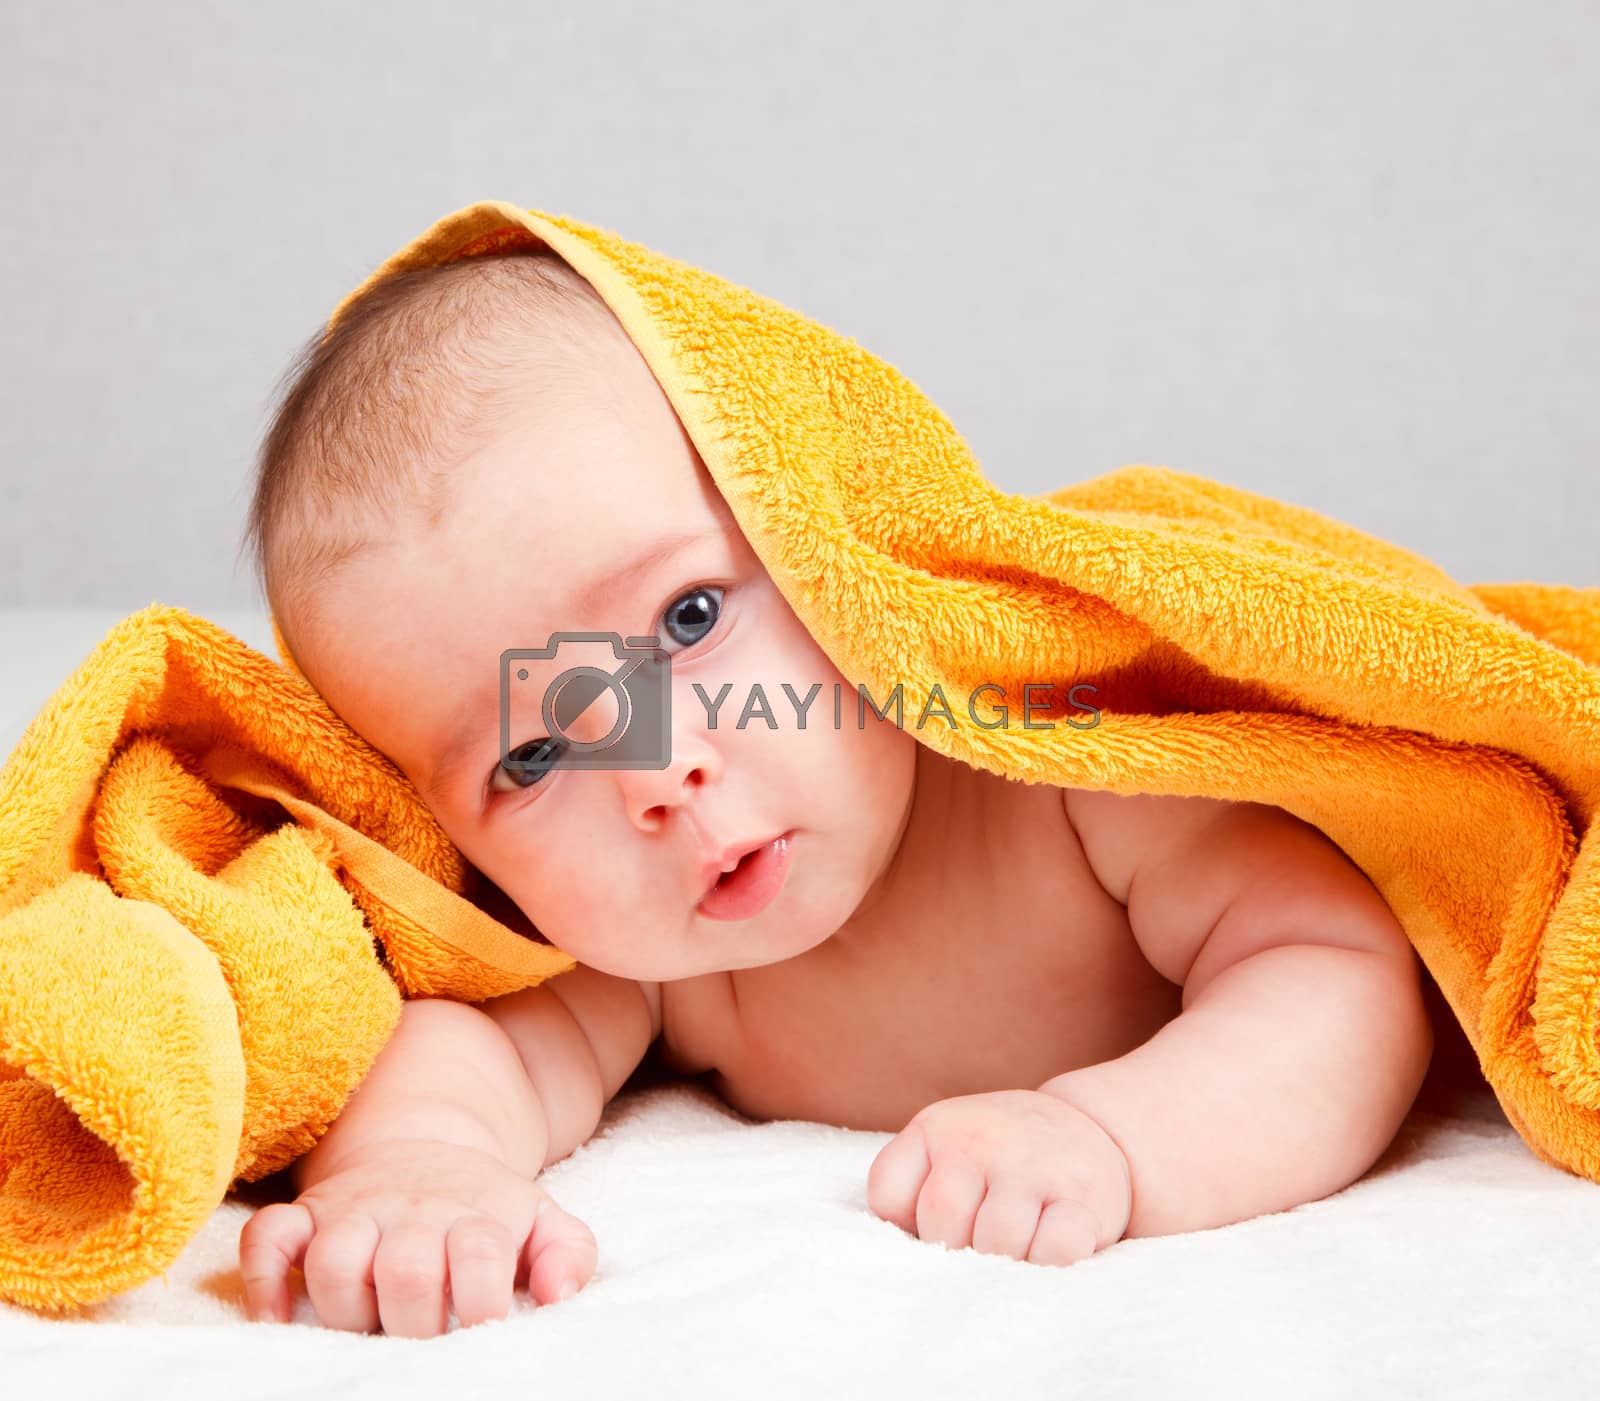 Royalty free image of Infant under towel by naumoid